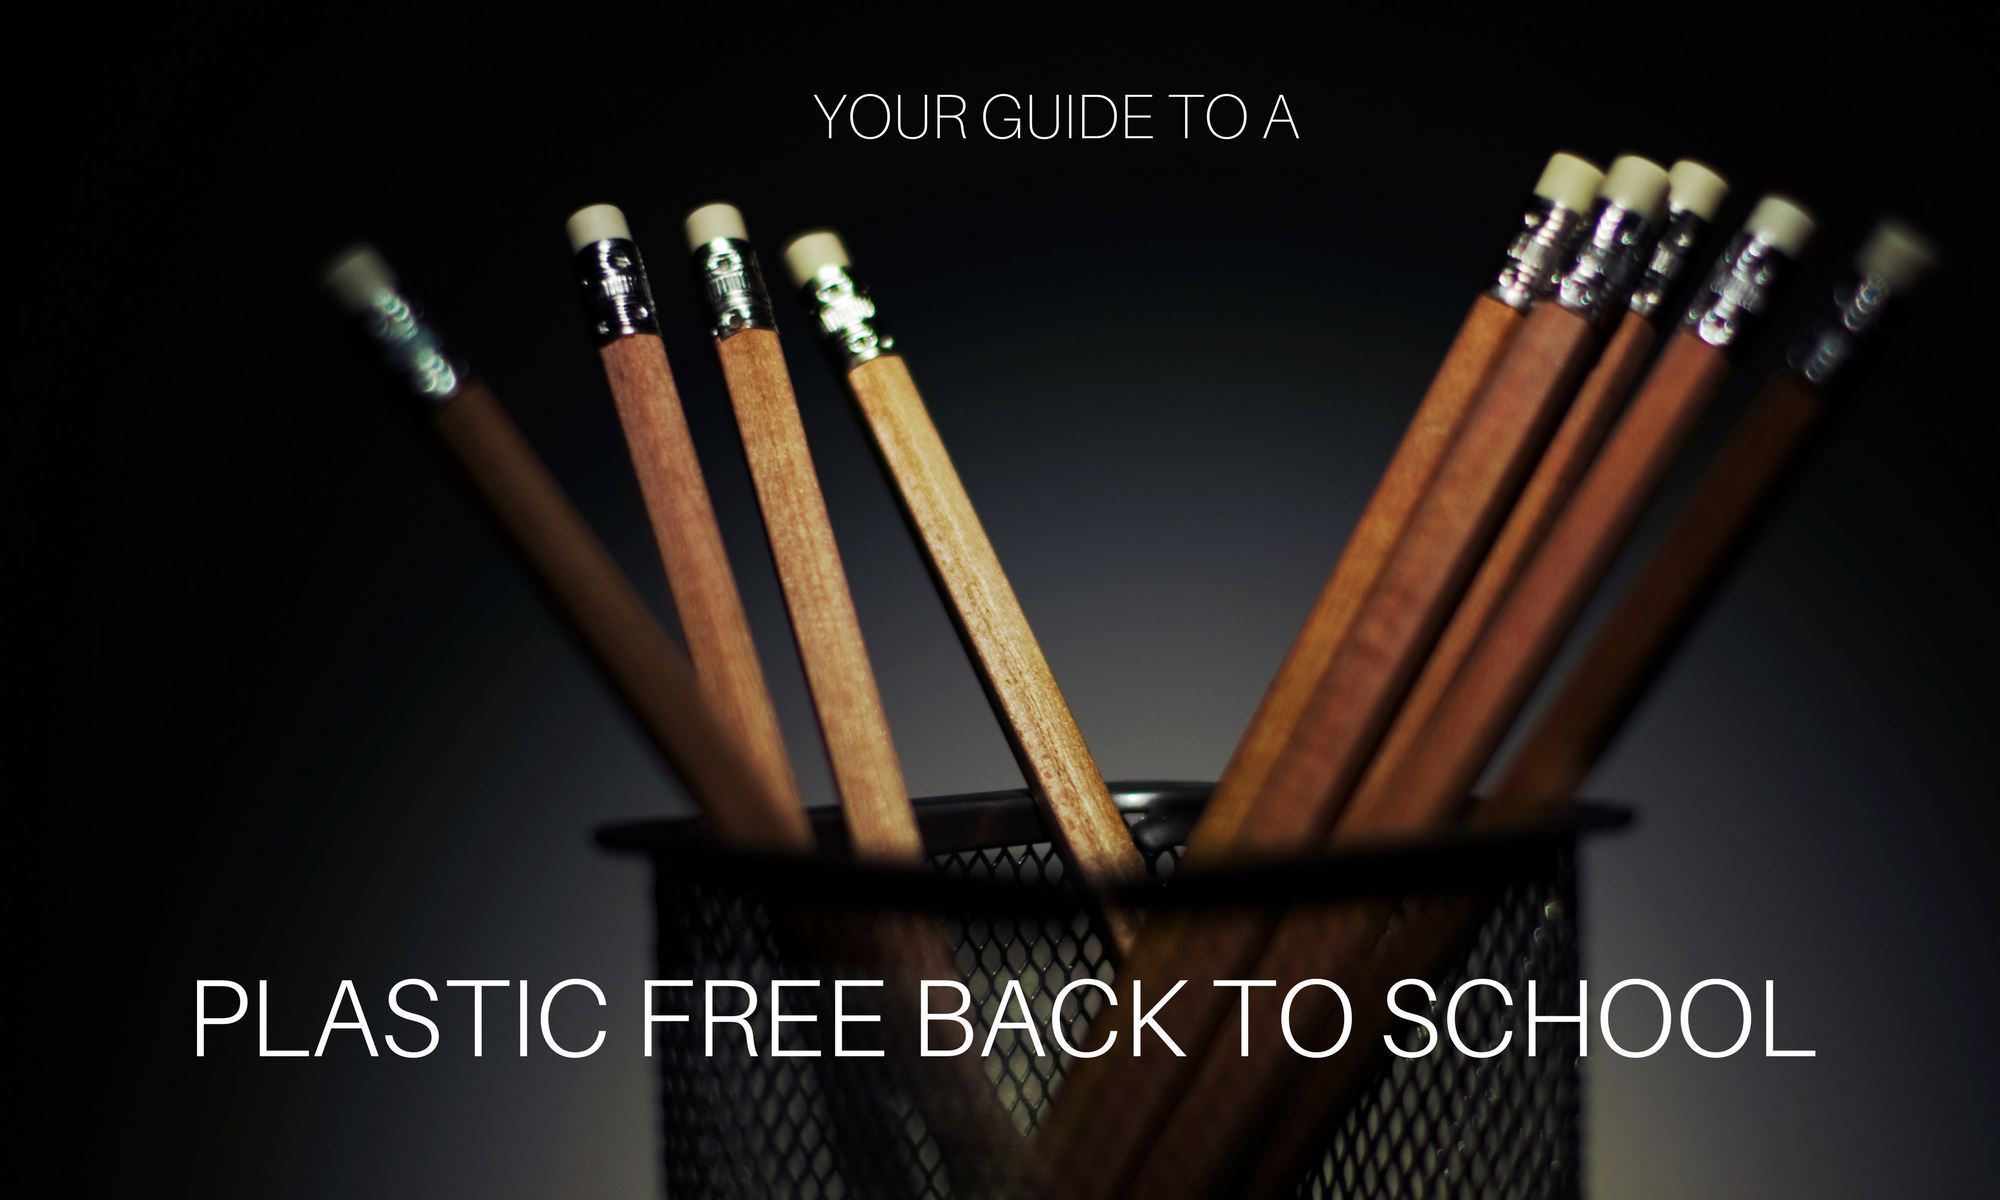 Your Guide to a Plastic Free Back to School